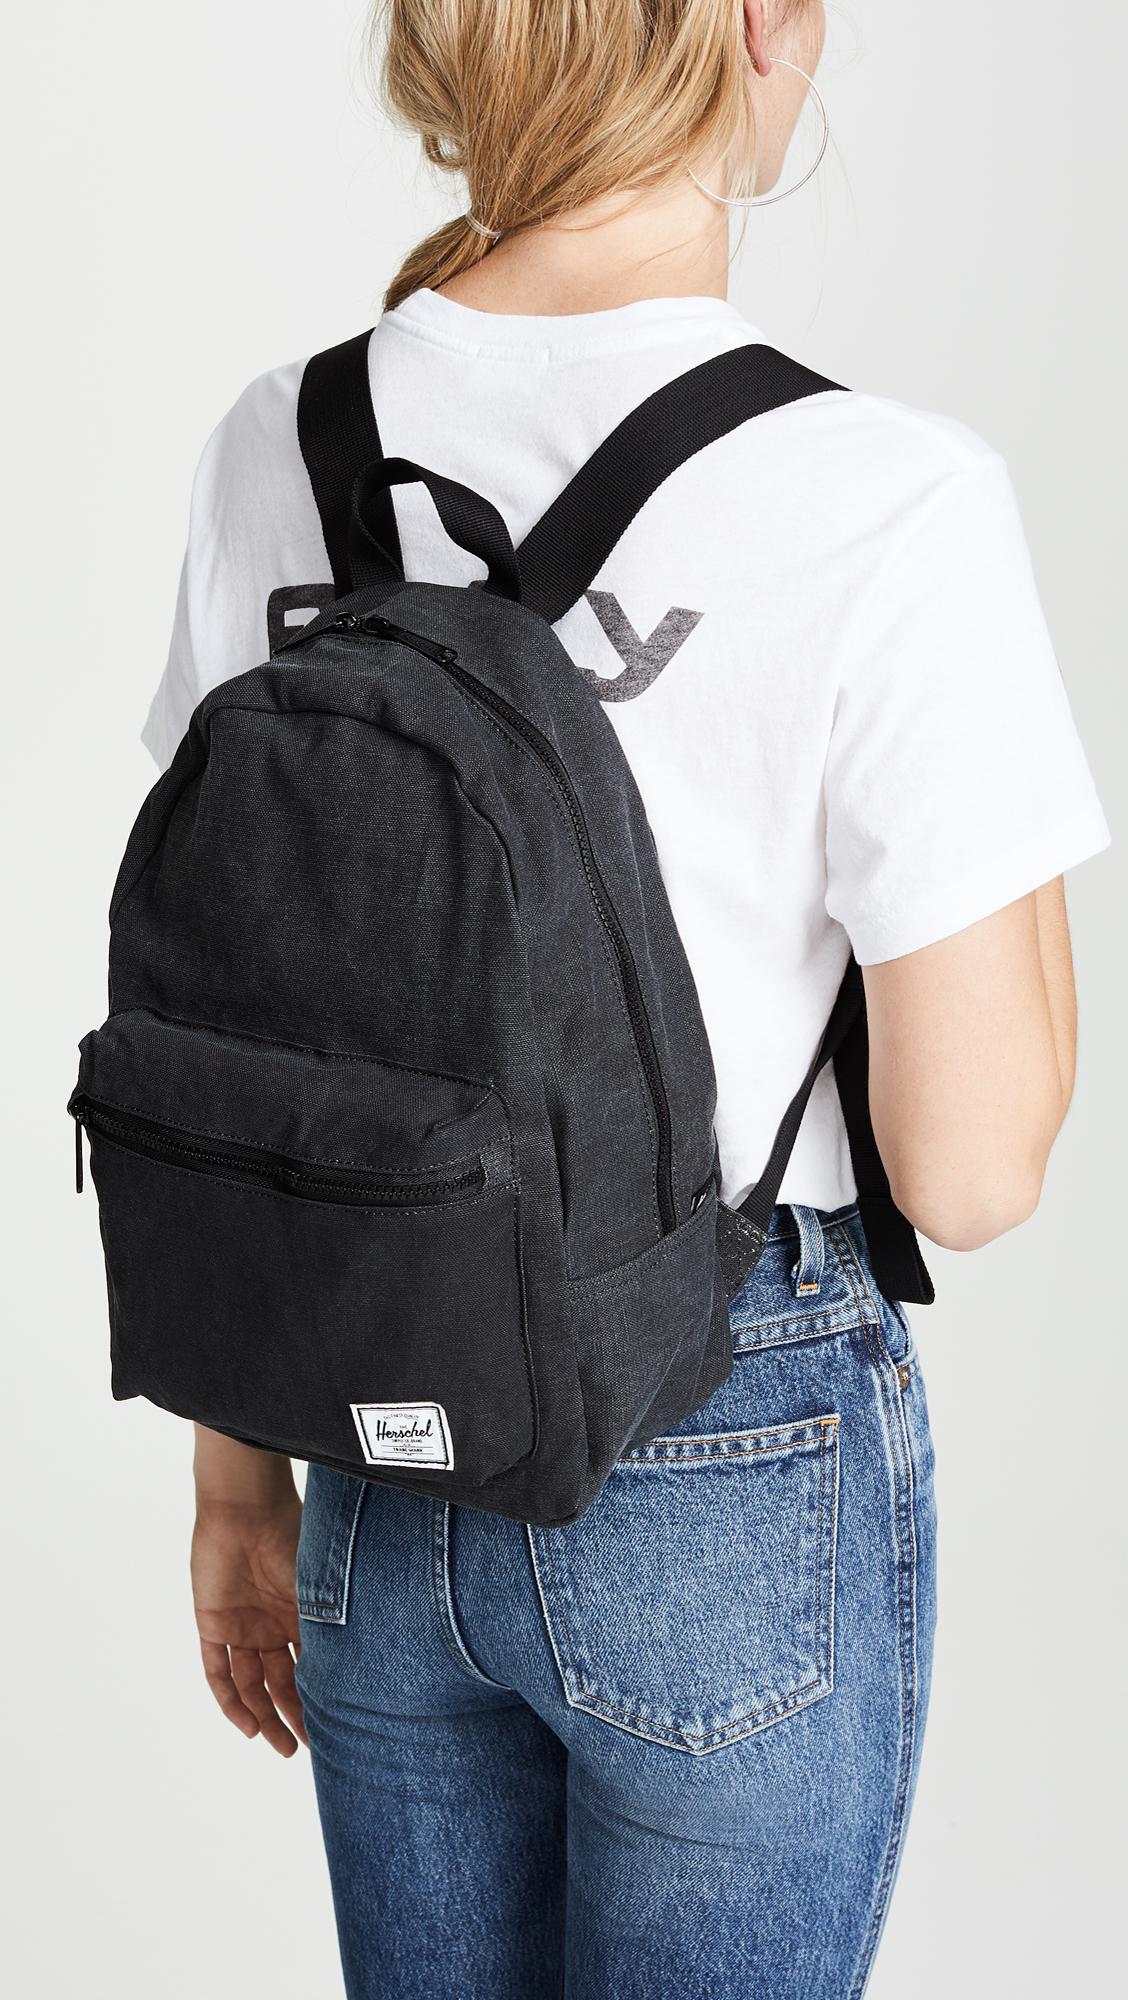 Herschel Supply Co. Cotton Casual Grove Backpack in